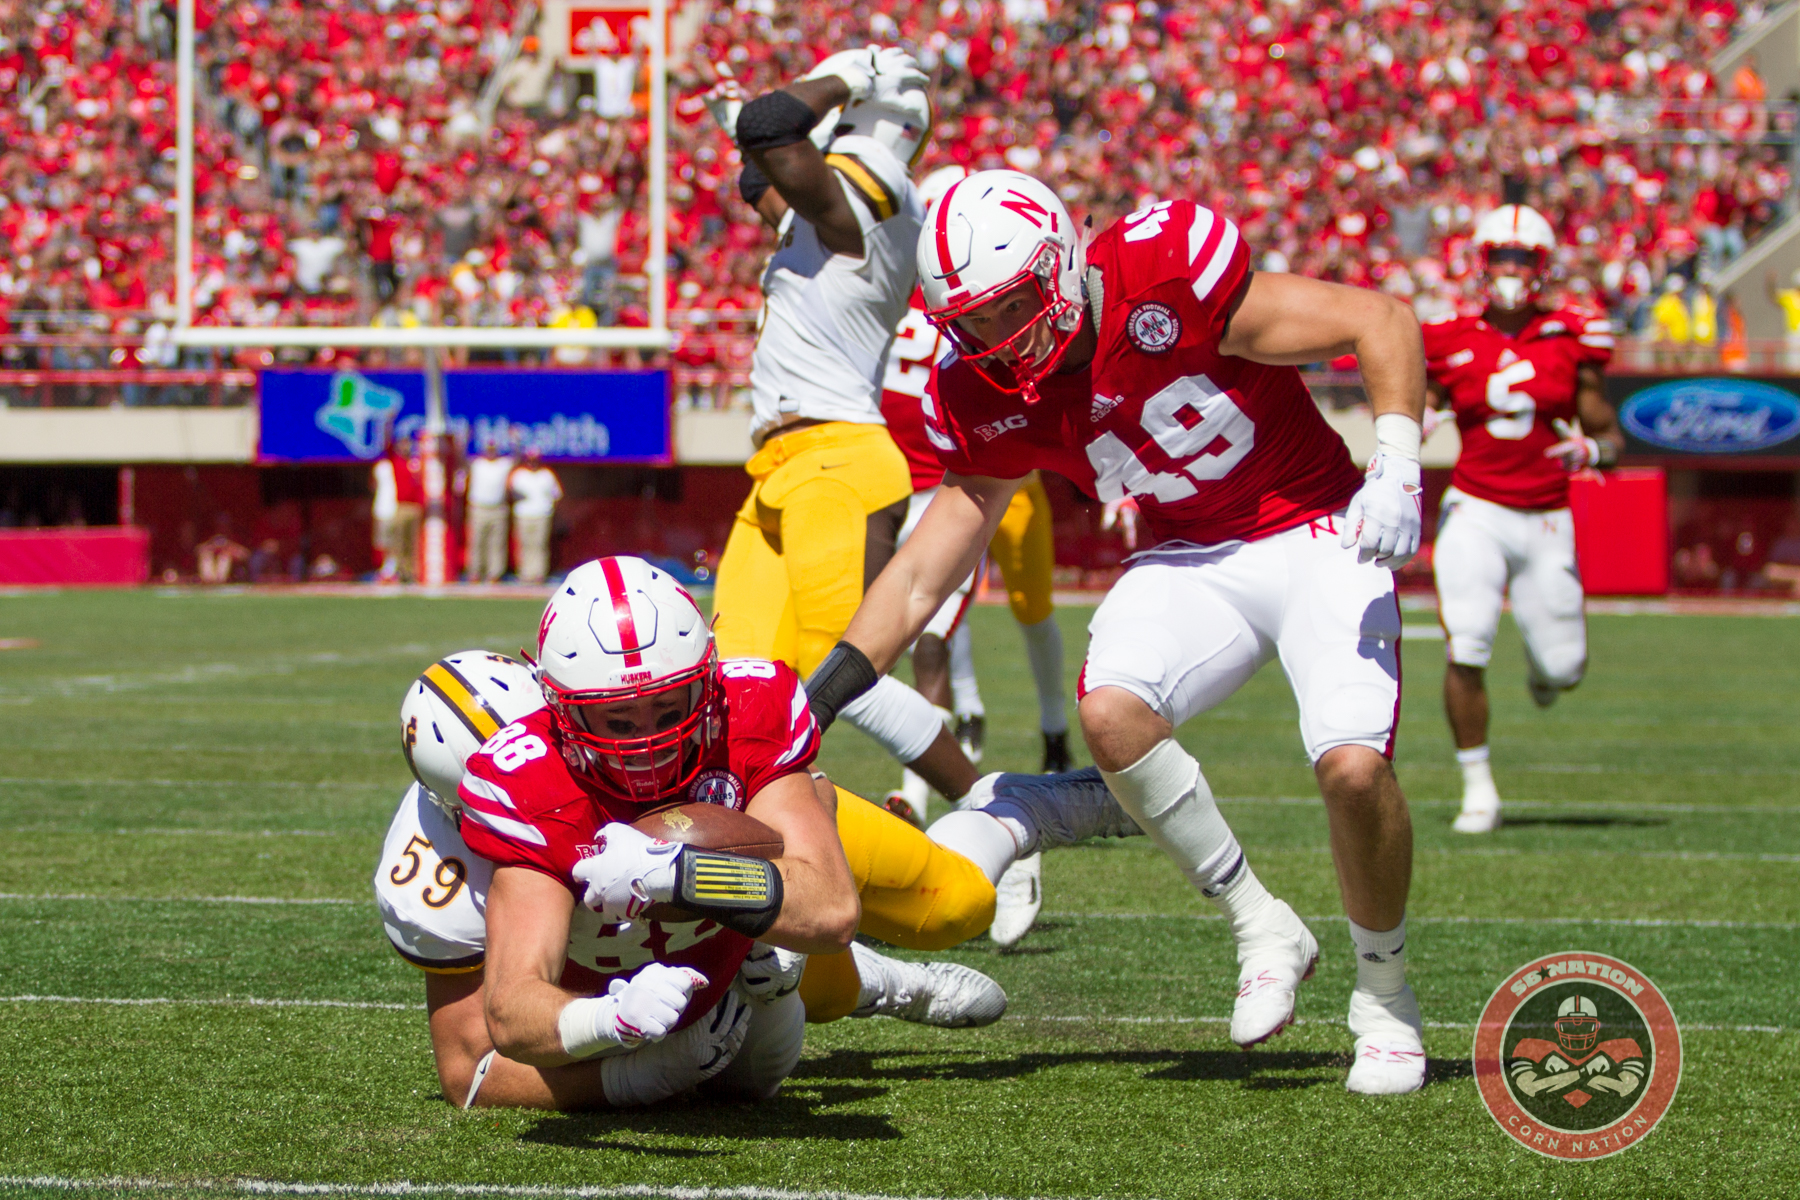 Gallery: Armstrong Sets Record, Huskers Move to 2-0